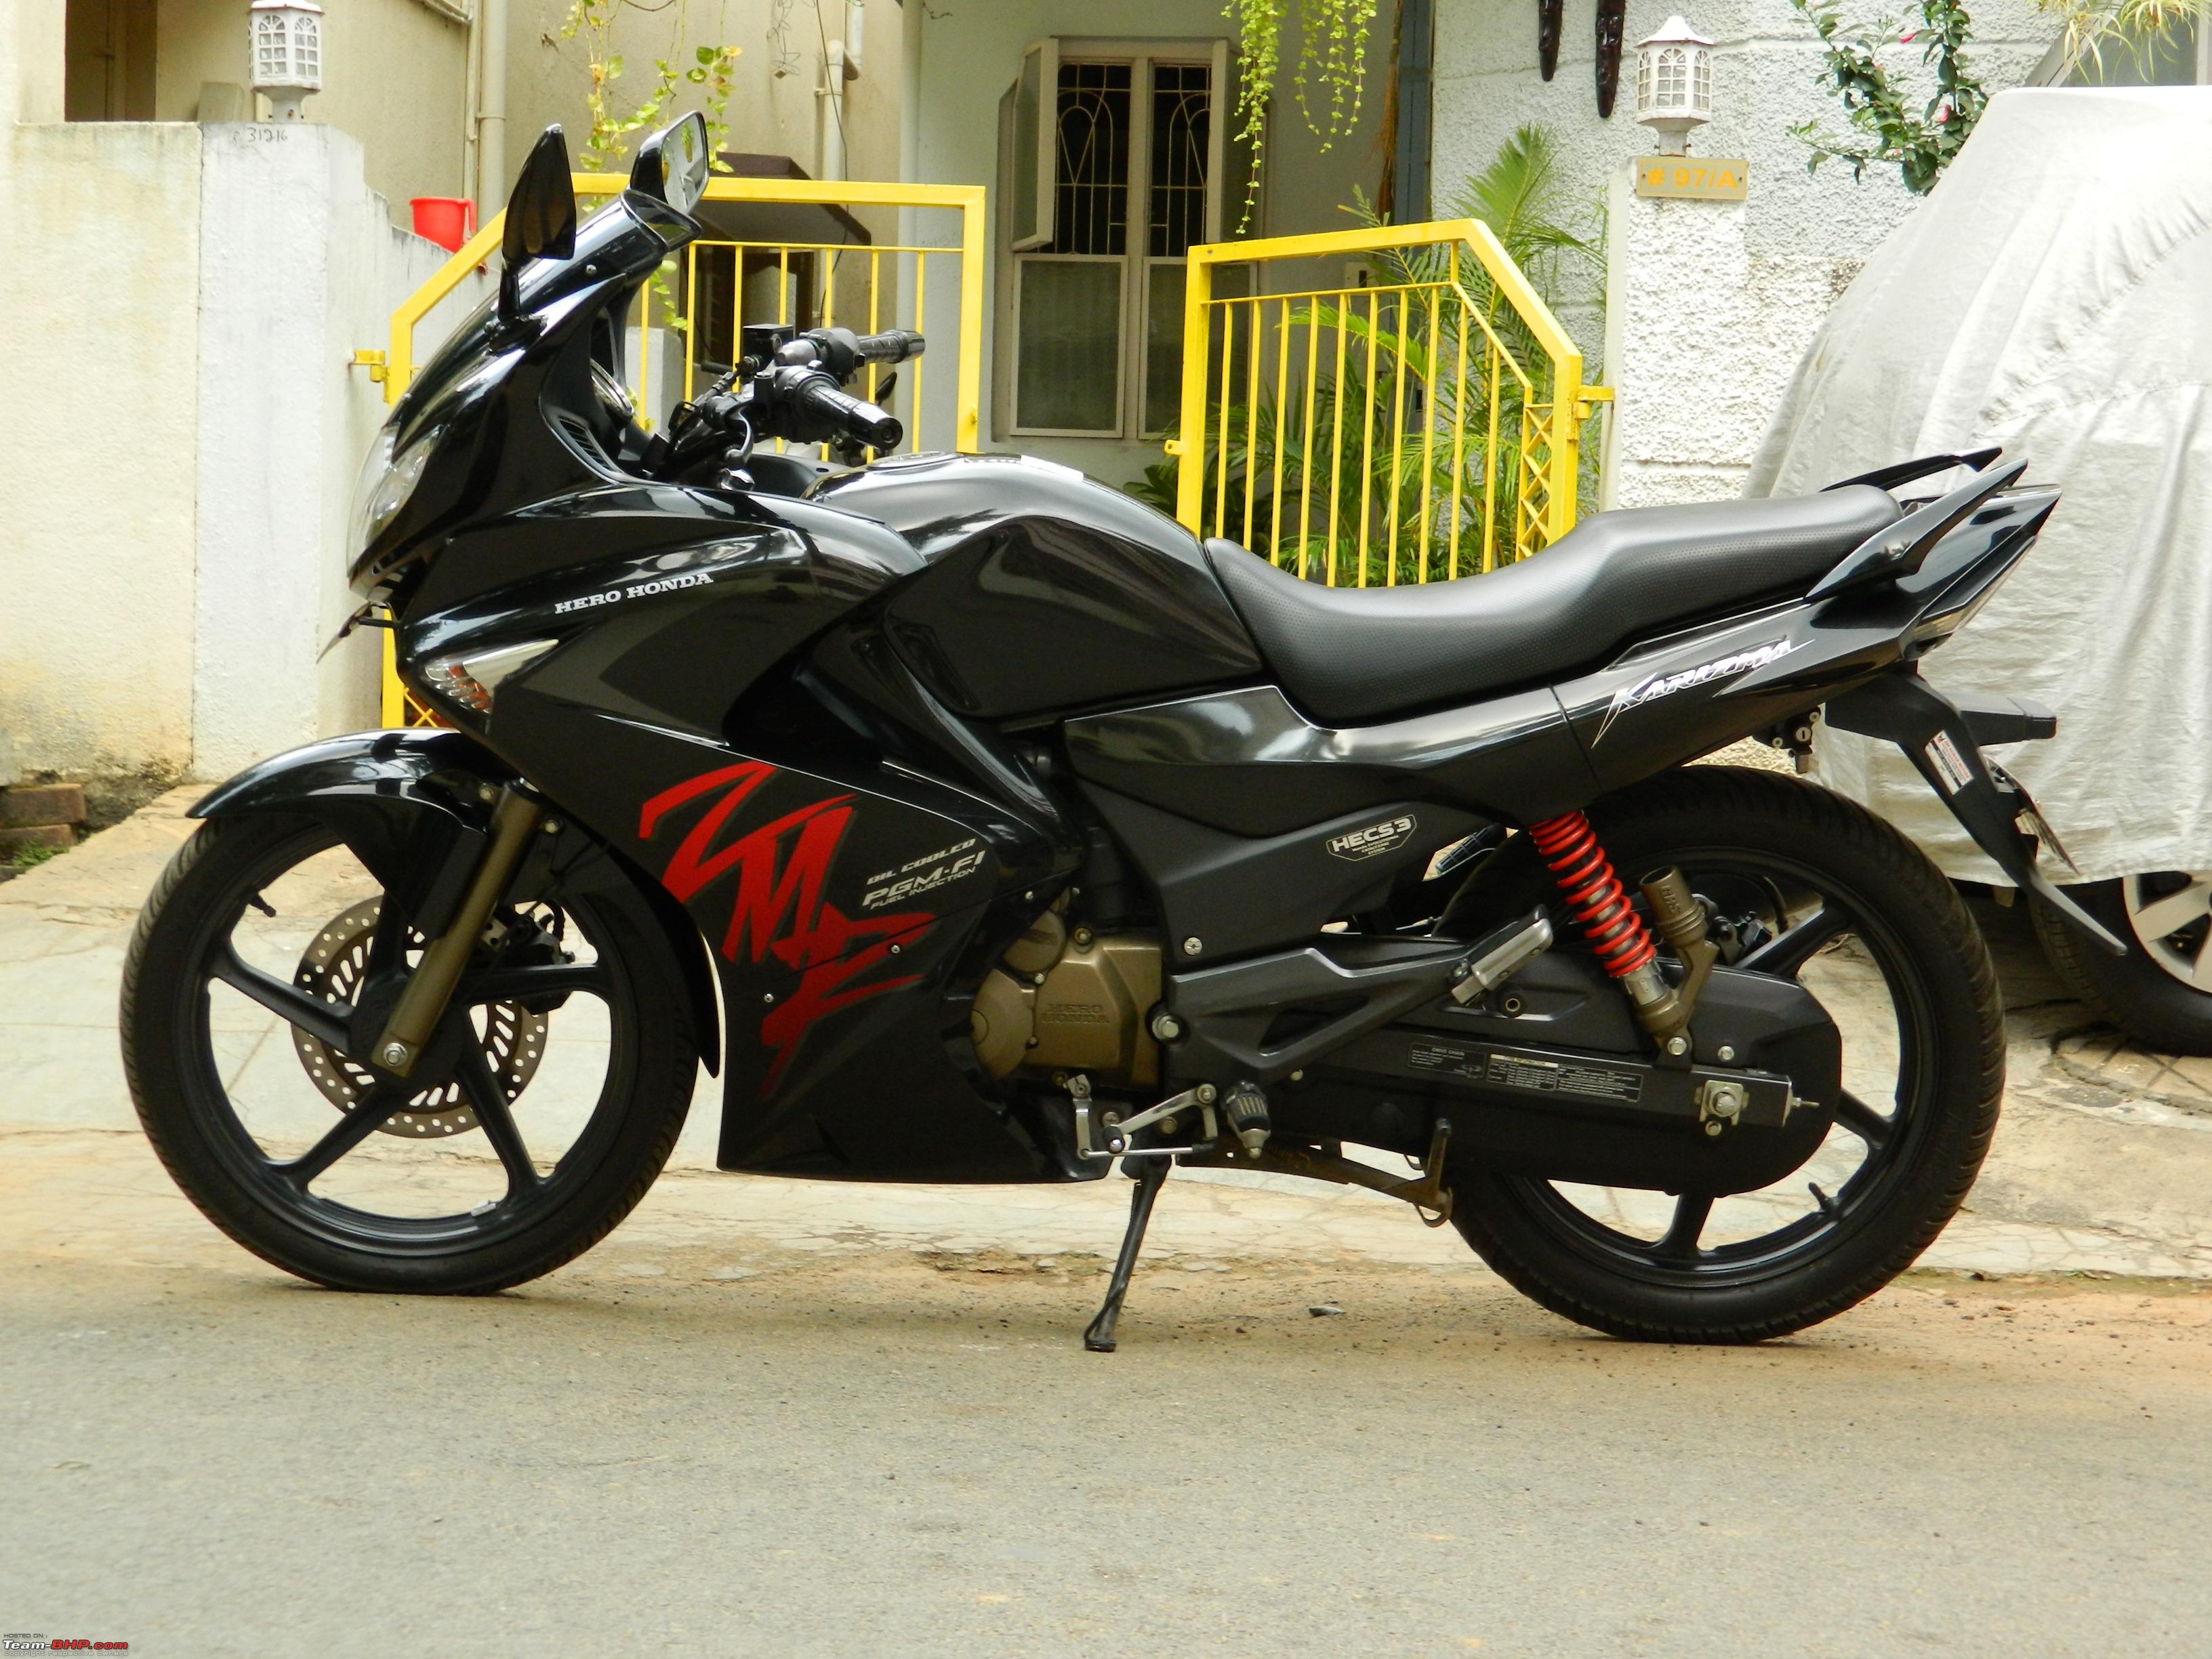 Suzuki Gixxer SF spied EDIT: Launched at Rs. 92,596 (on ...